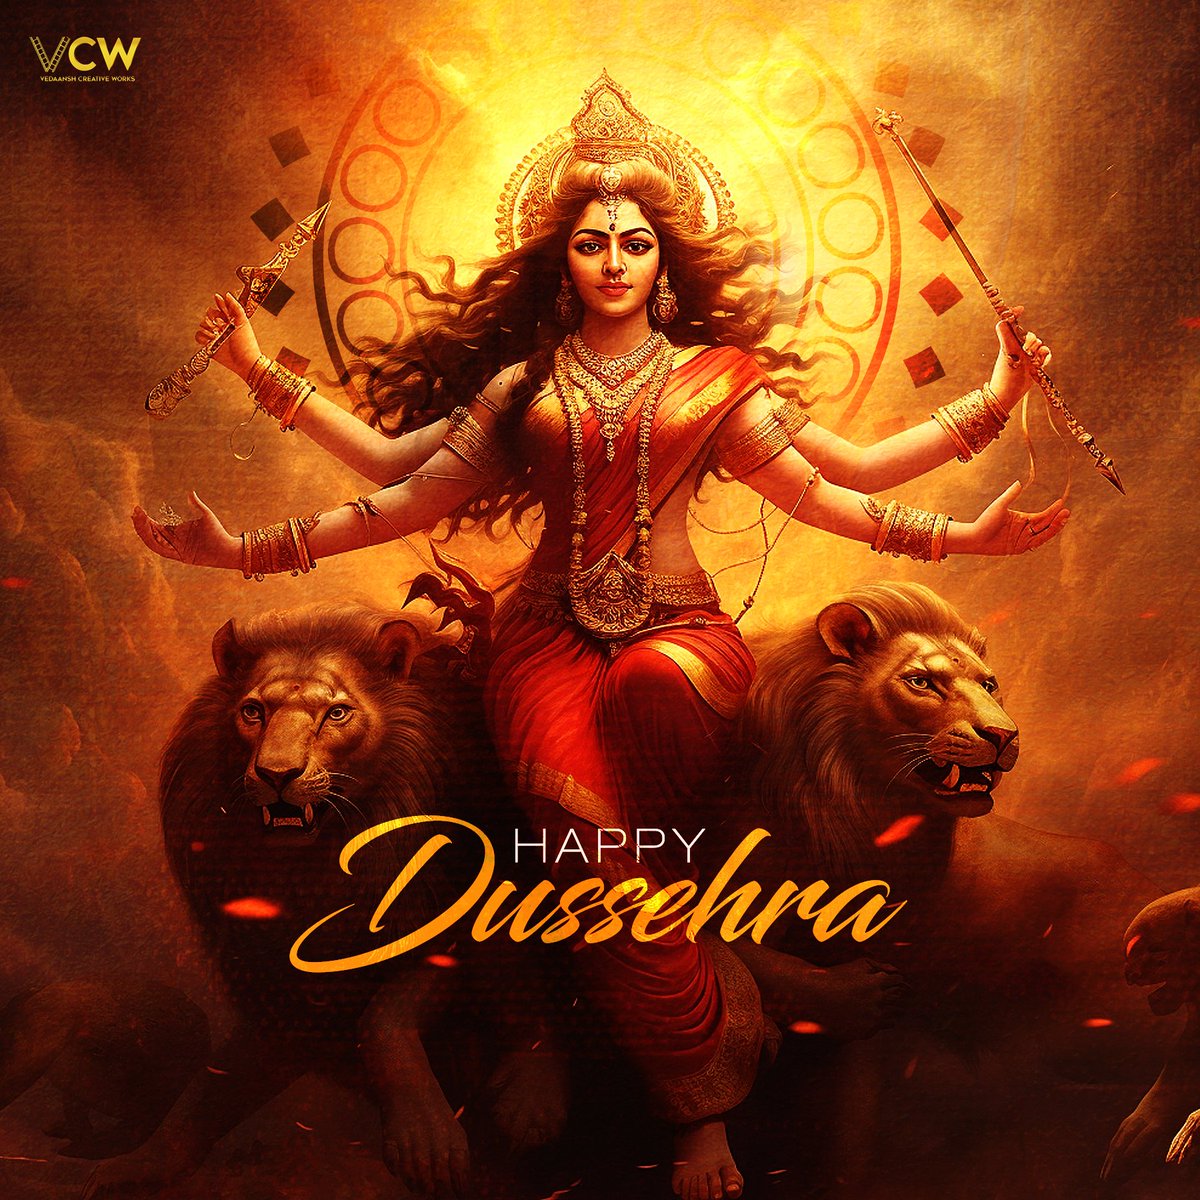 May the blessings of Lord Rama and Goddess Durga be constantly showered on you and your family 😇 #HappyDussehra 💥